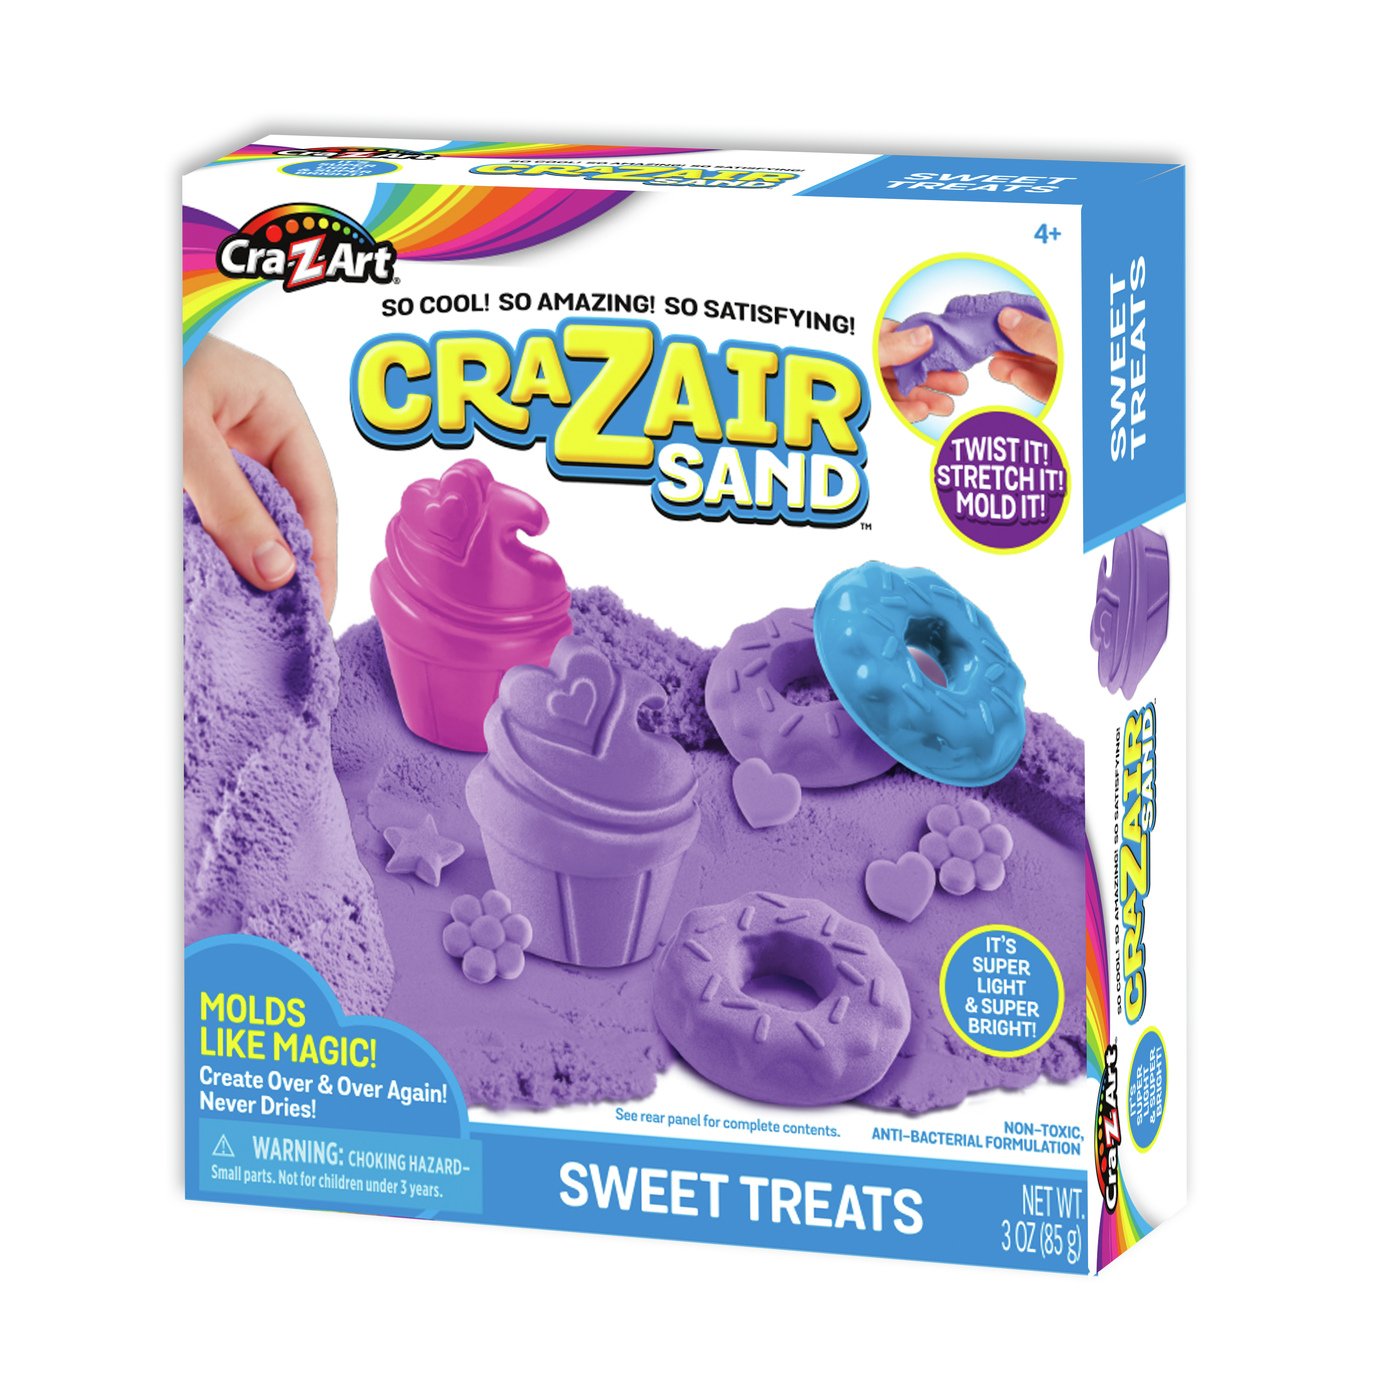 Cra-Z-Sand Air Sand Review